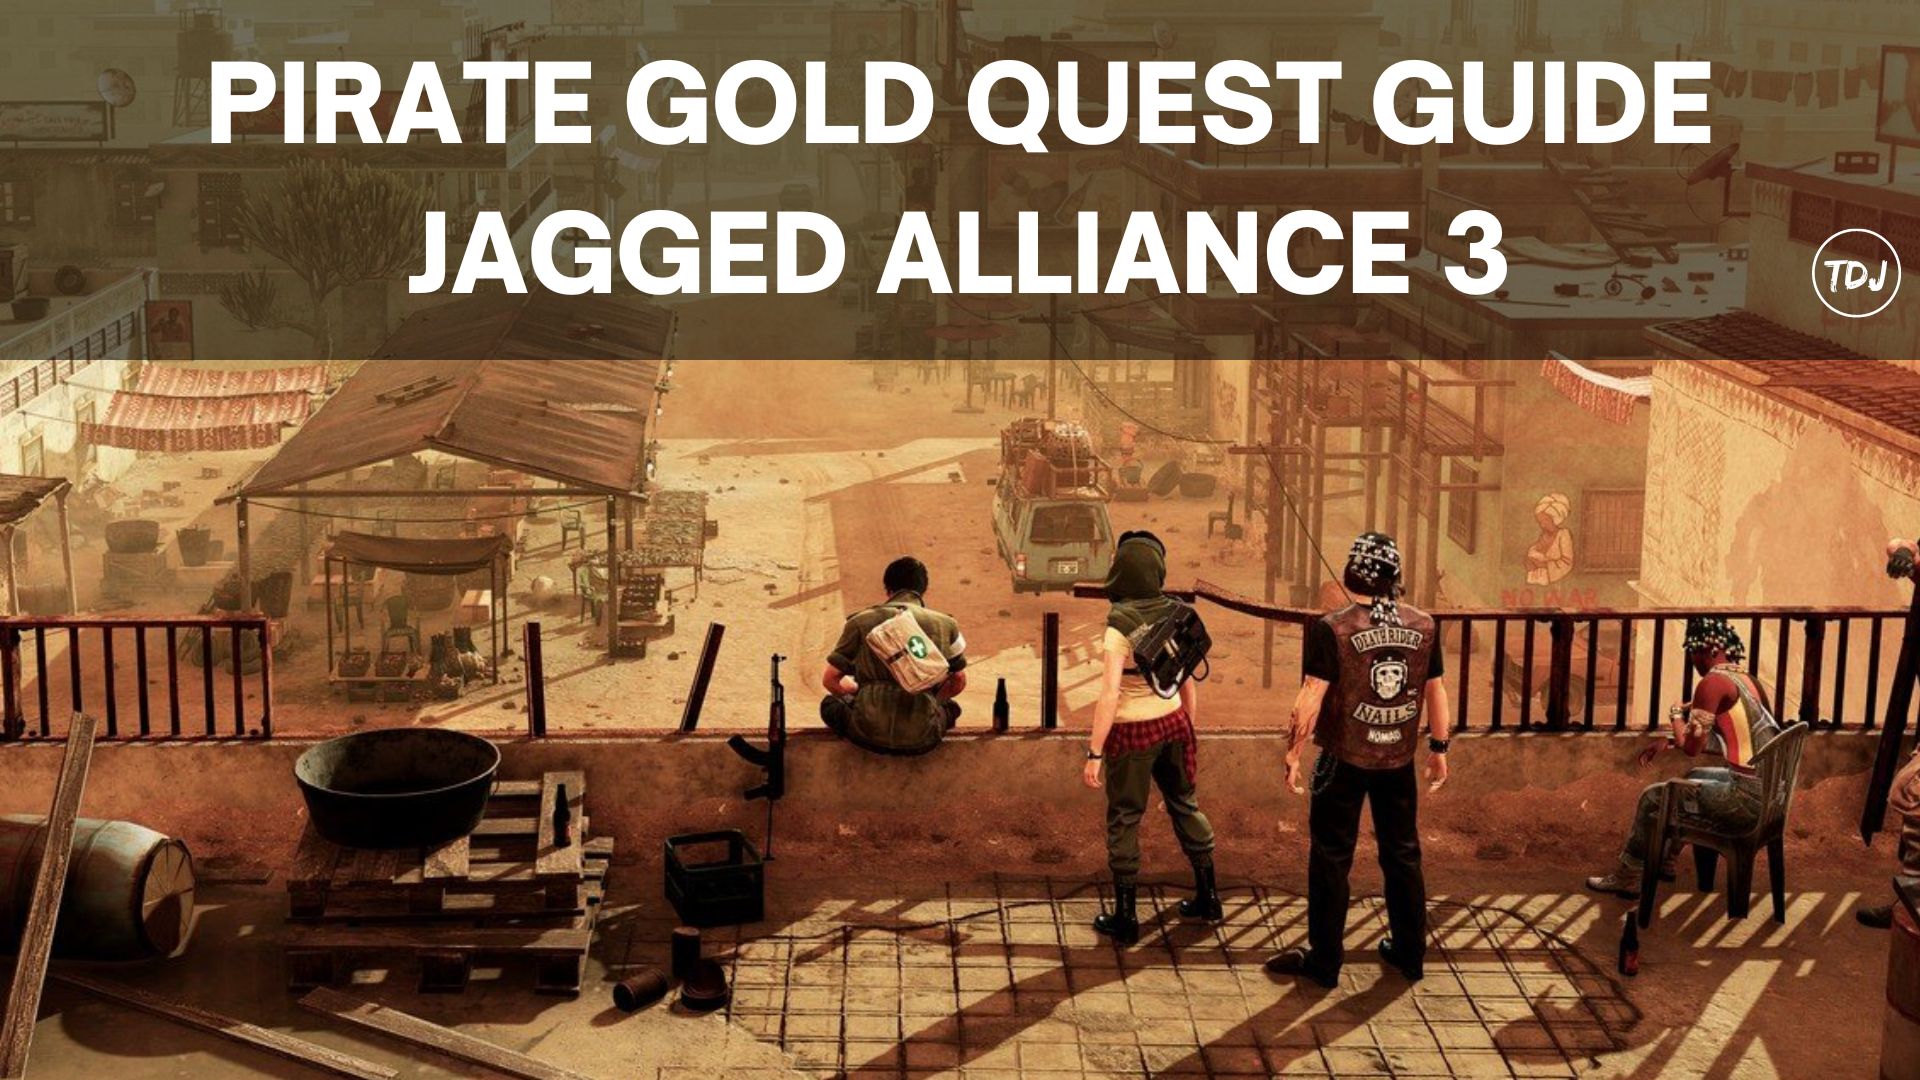 pirate gold quest guide jagged alliance 3